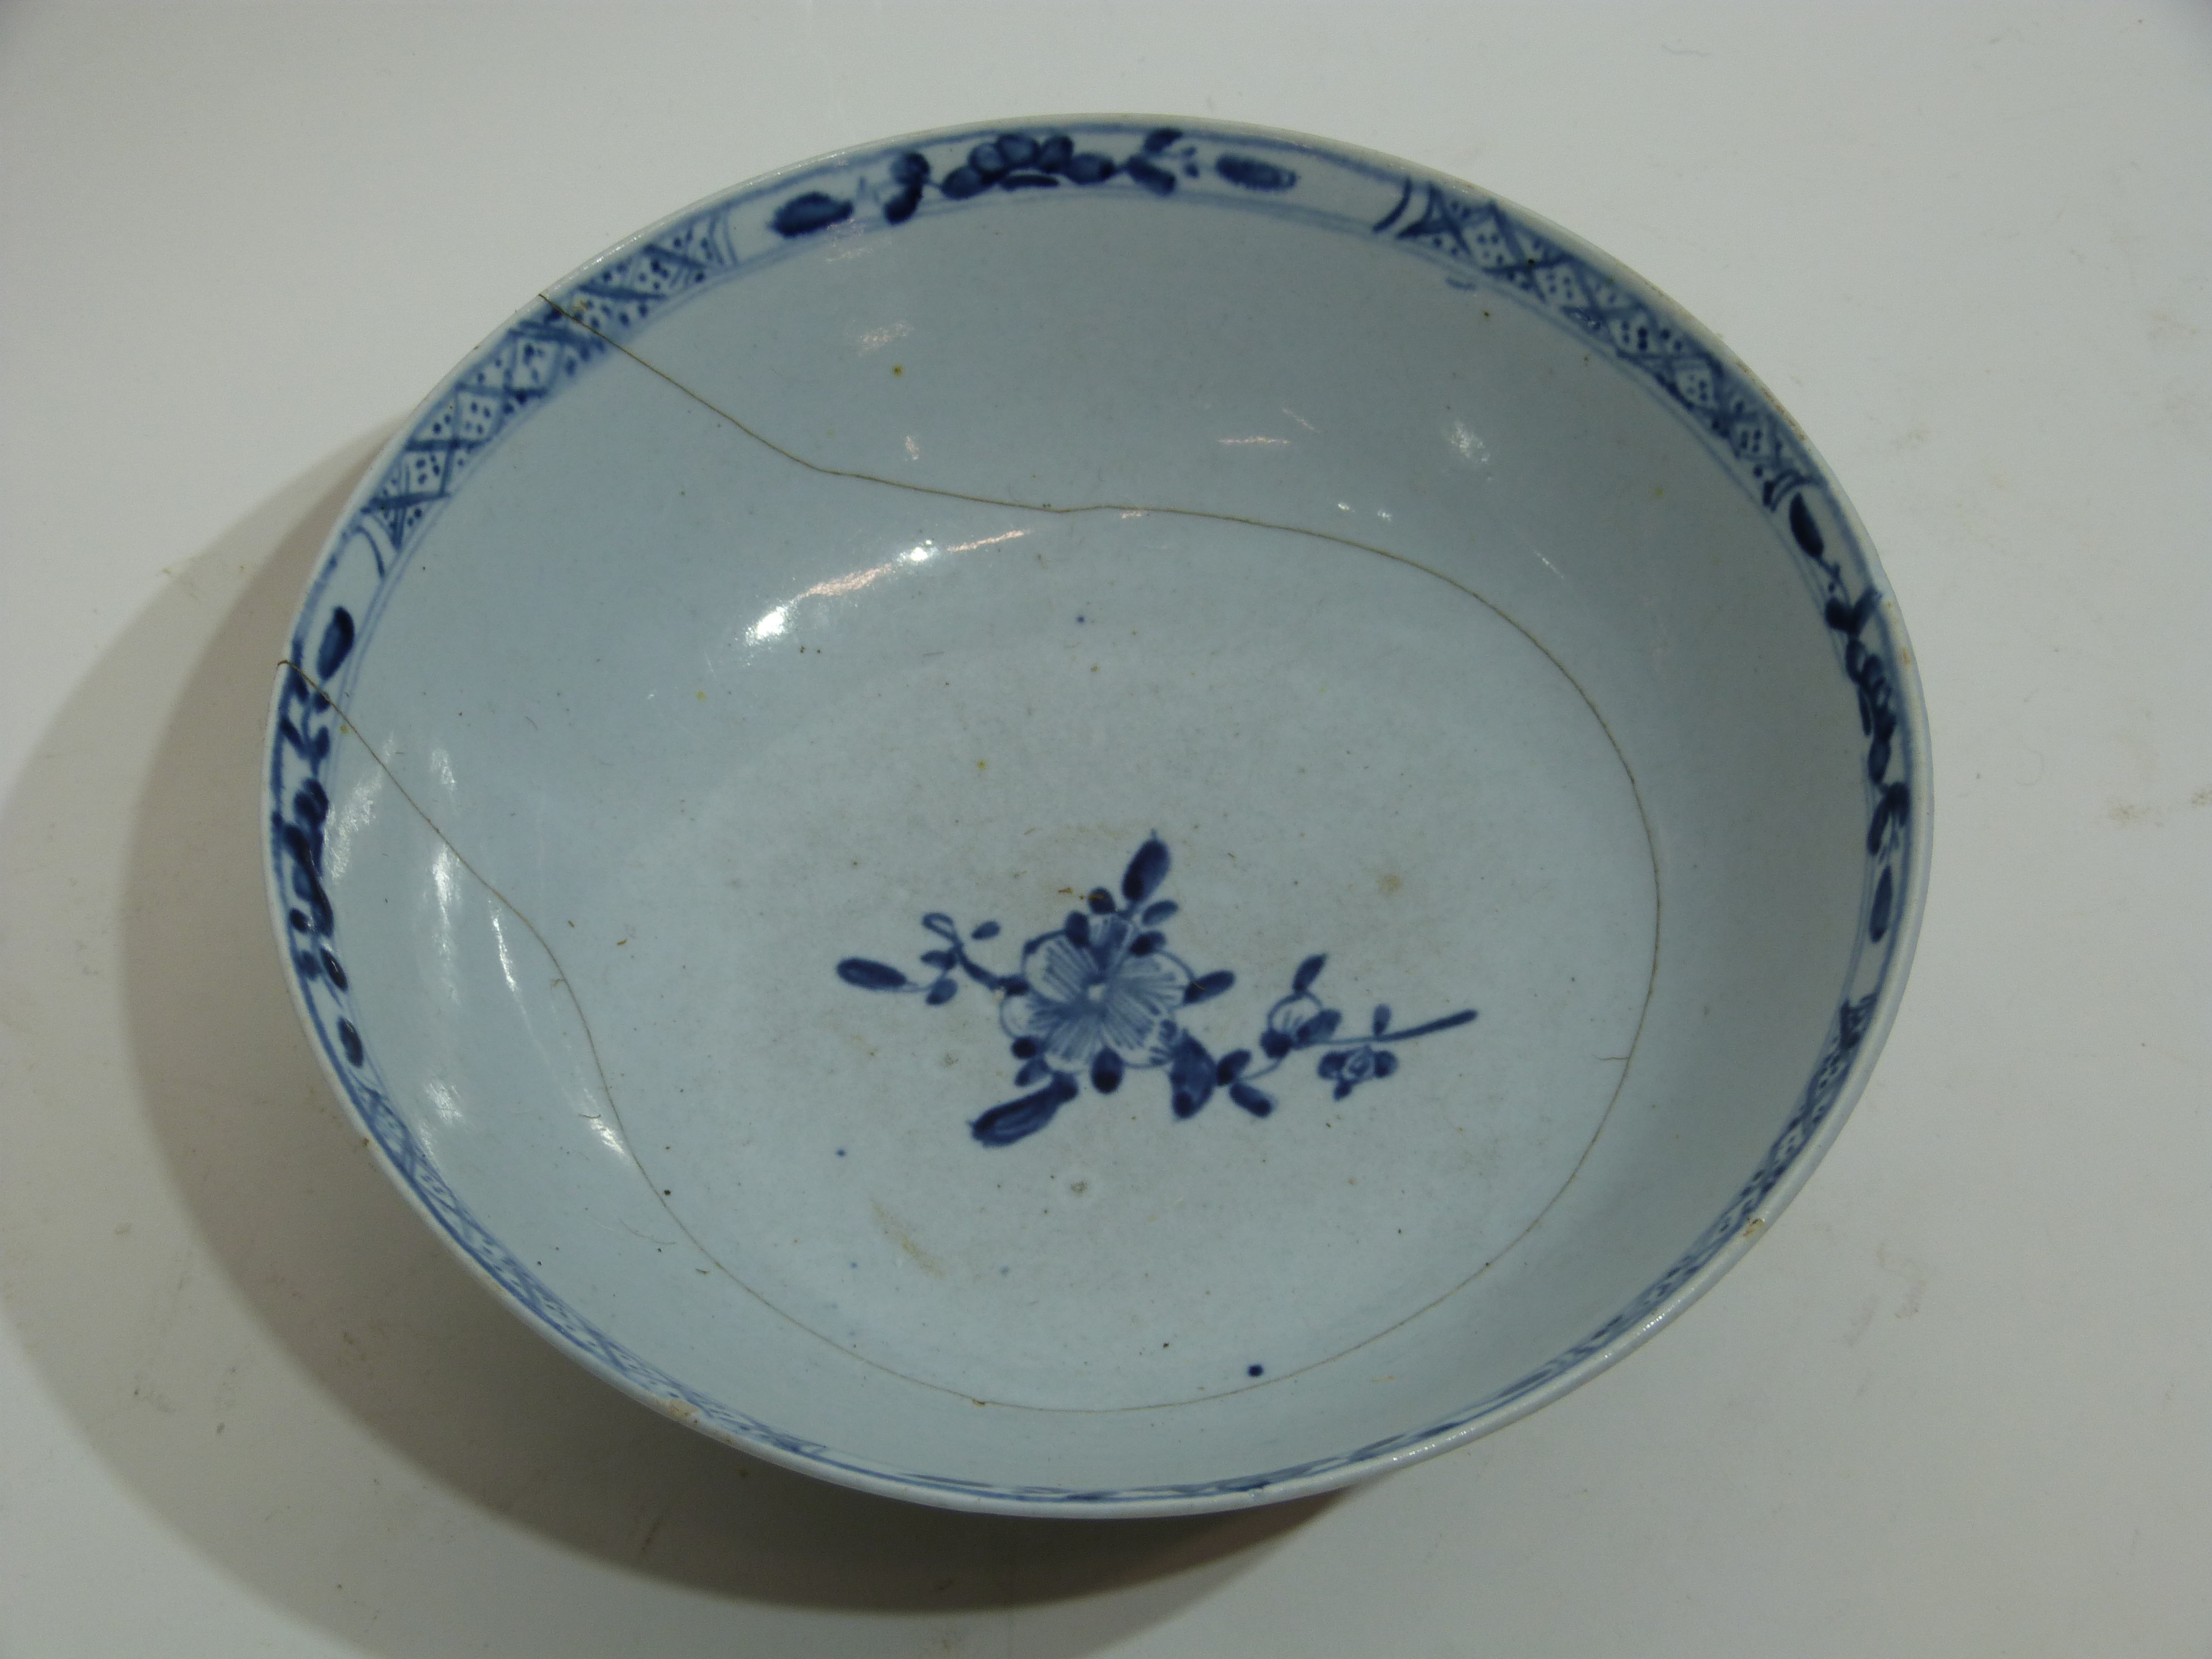 Early Lowestoft porcelain bowl, the flared body with a design in dark blue of pagodas and fishing - Image 2 of 3